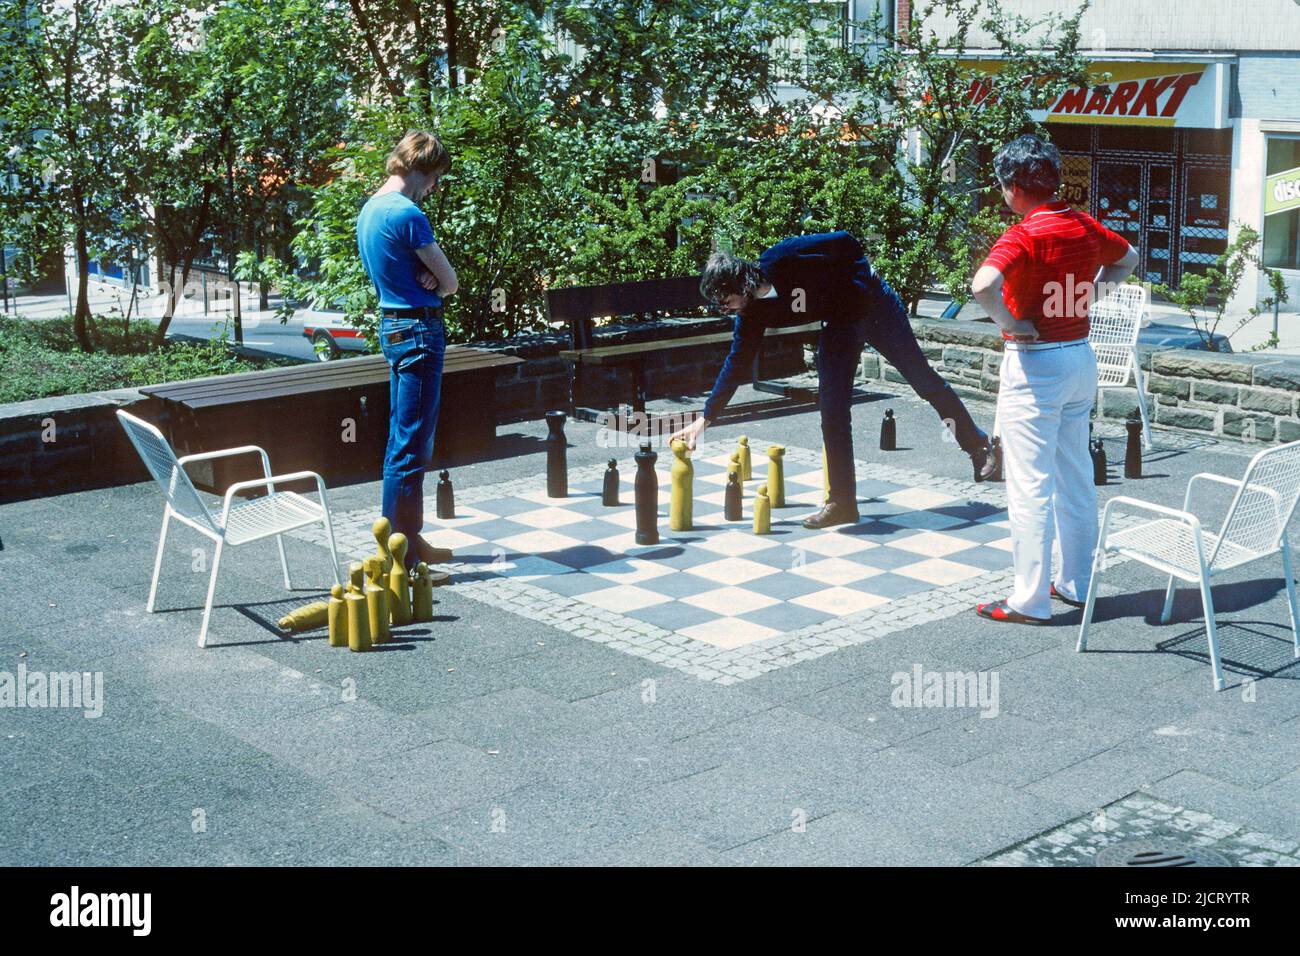 Men playing chess on a giant chessboard in the street in 1982, Siegen, North Rhine-Westphalia, Germany Stock Photo